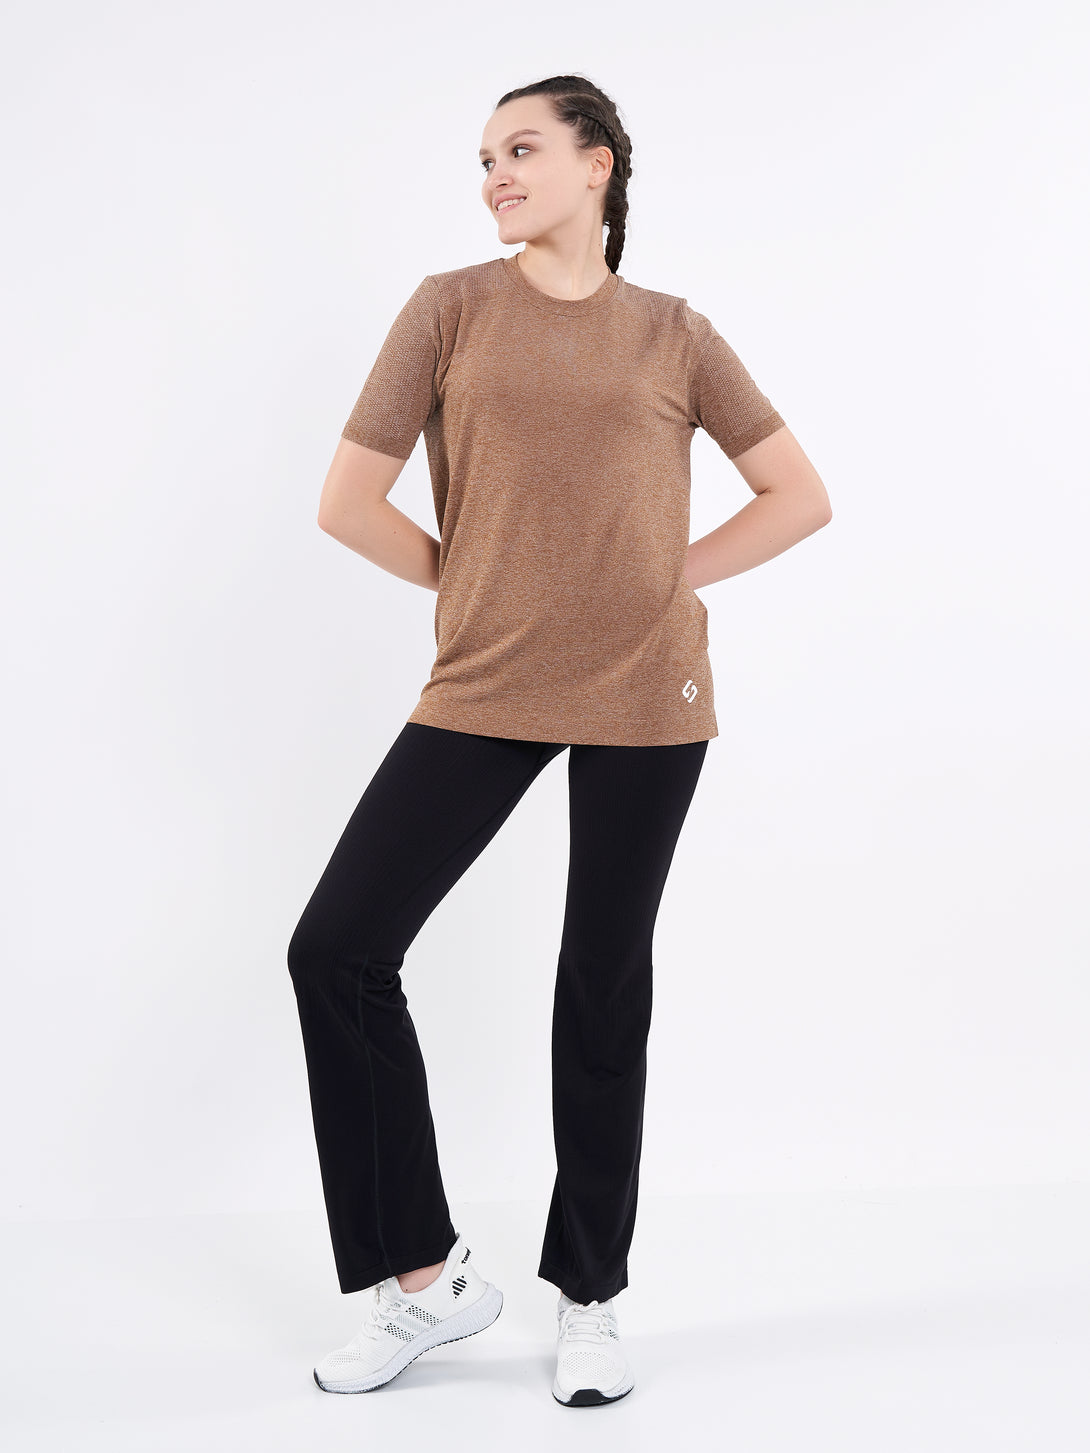 A Woman Wearing Toffe Brown Color Unisex Seamless Melange T-Shirt. Enhanced Comfort